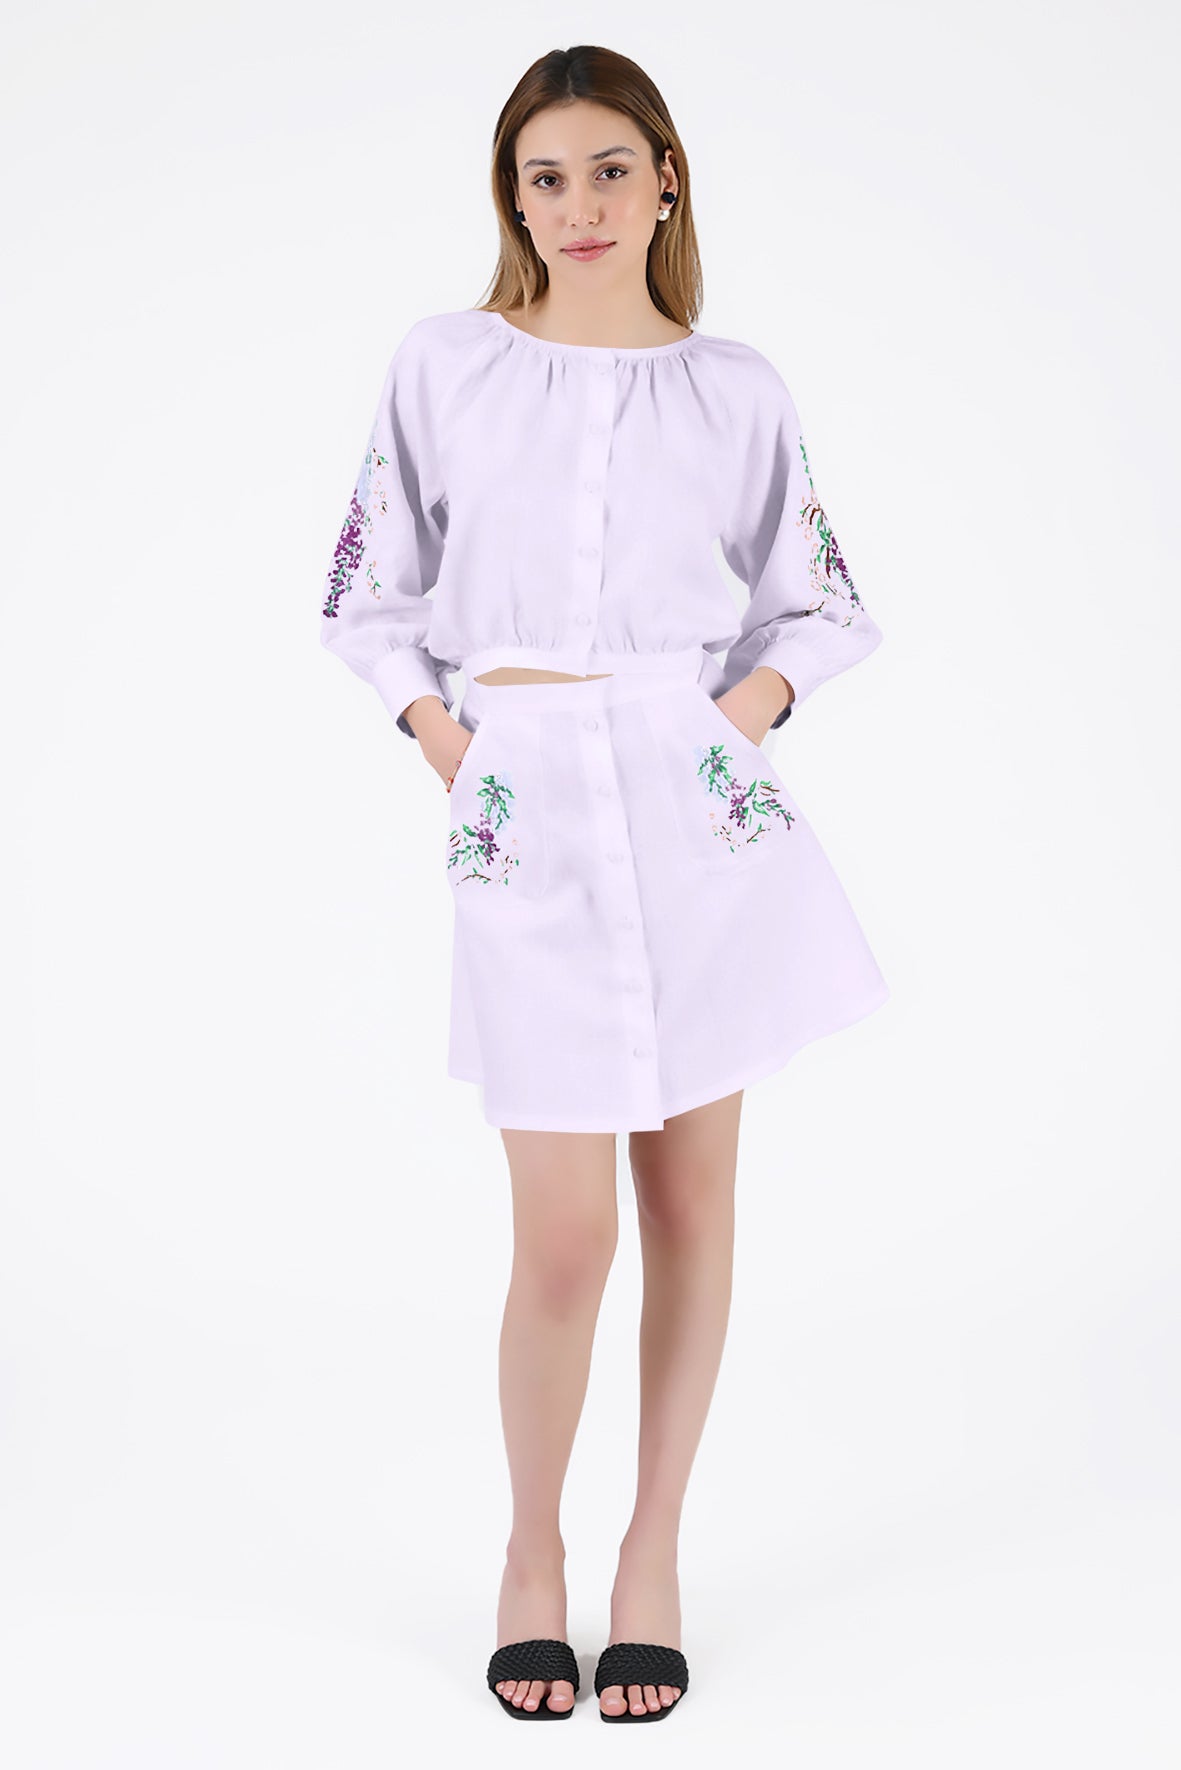 Brodere Skirt Set in Lilac